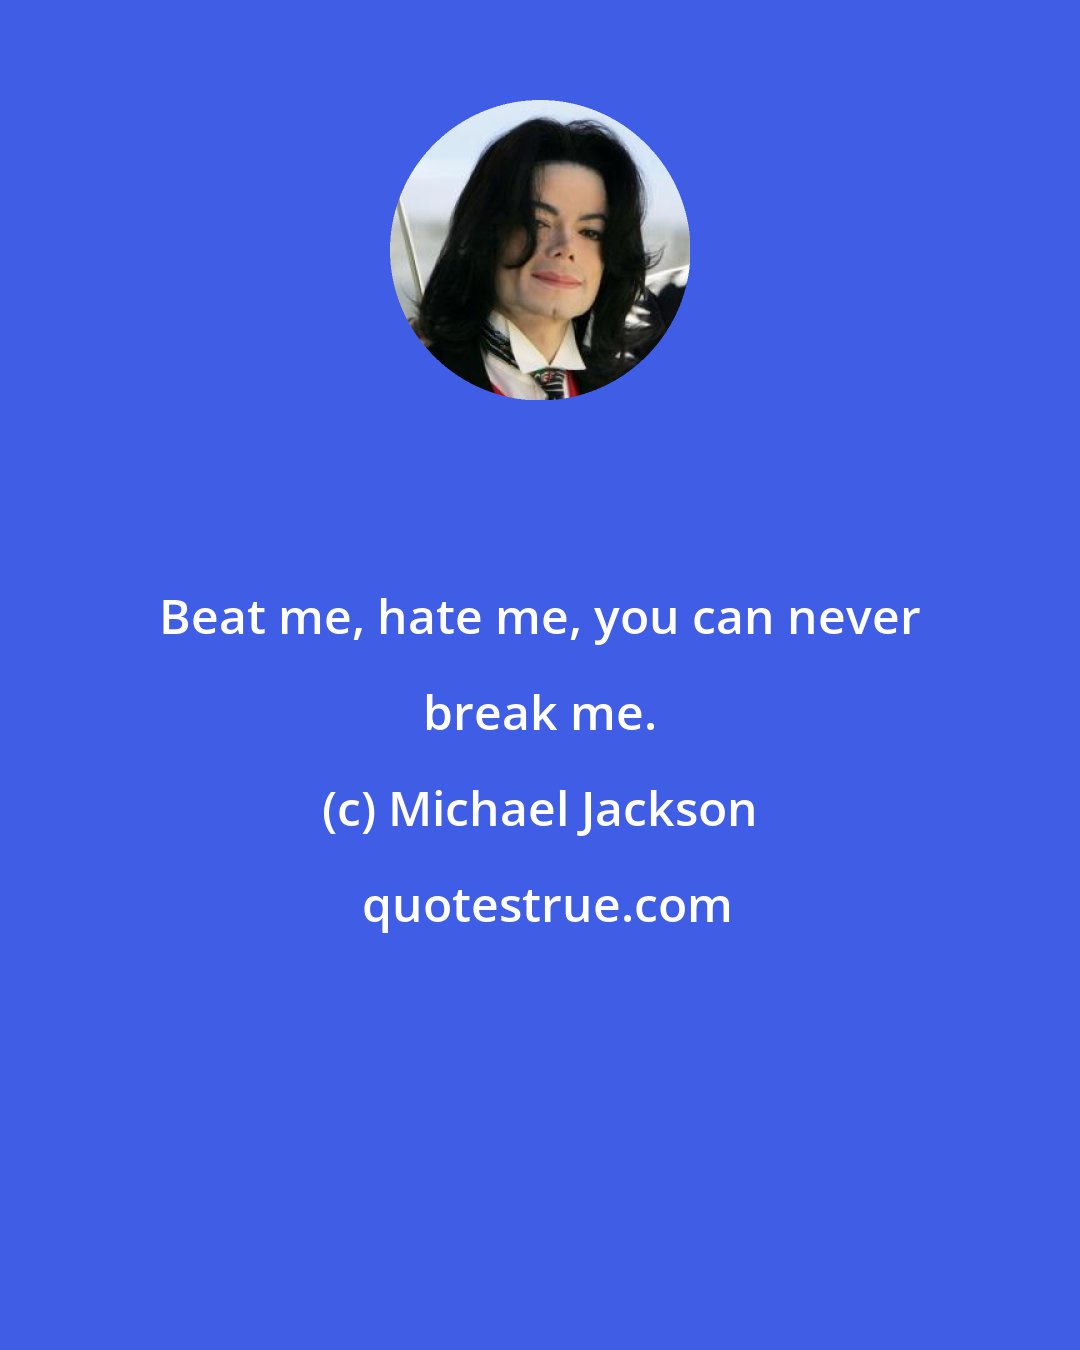 Michael Jackson: Beat me, hate me, you can never break me.